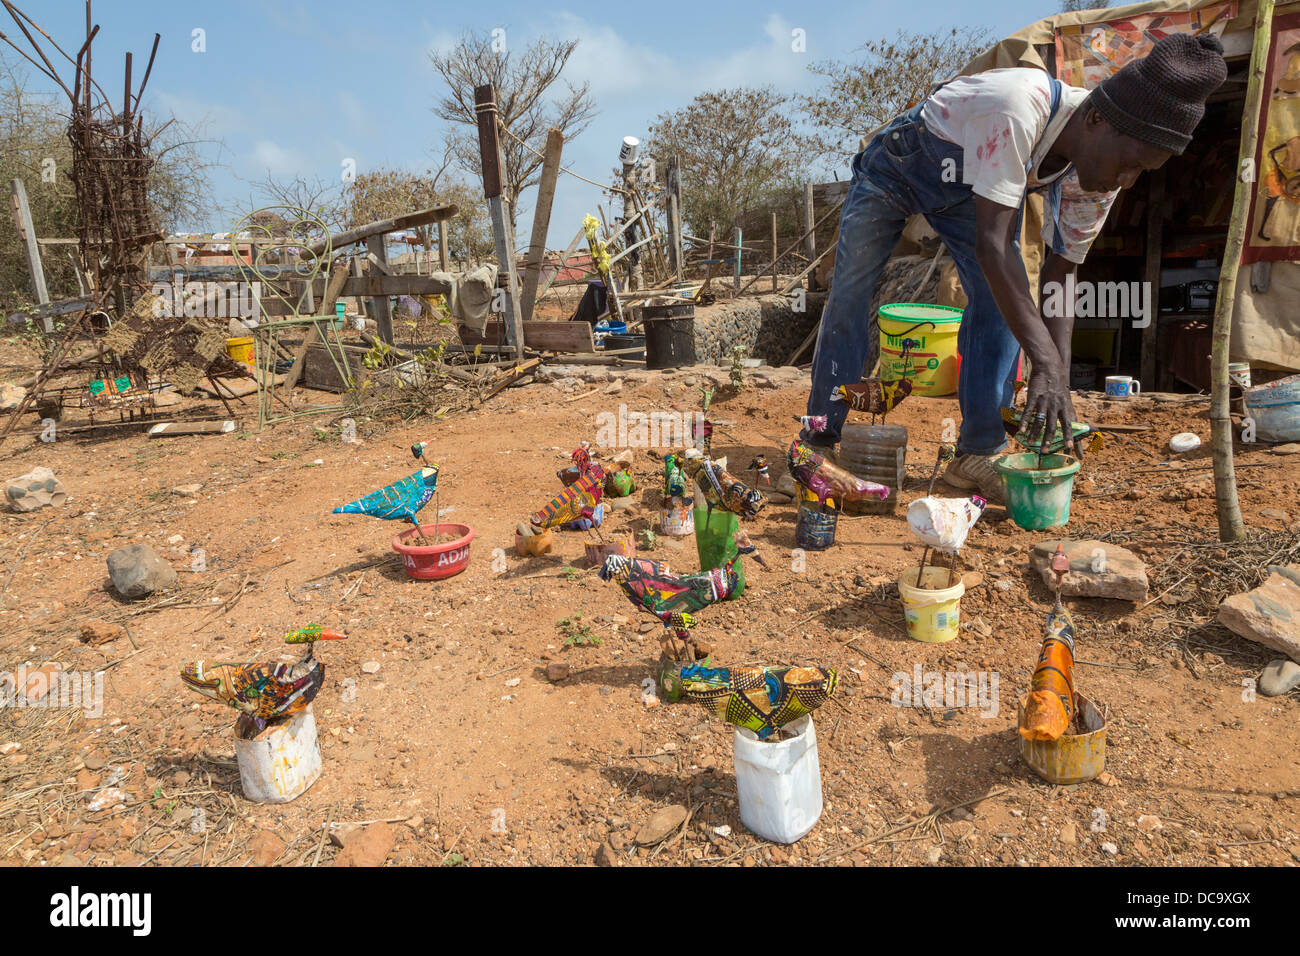 Artist Amadou Dieng and Birds Created from Recycled Materials. Goree Island, Senegal. Stock Photo